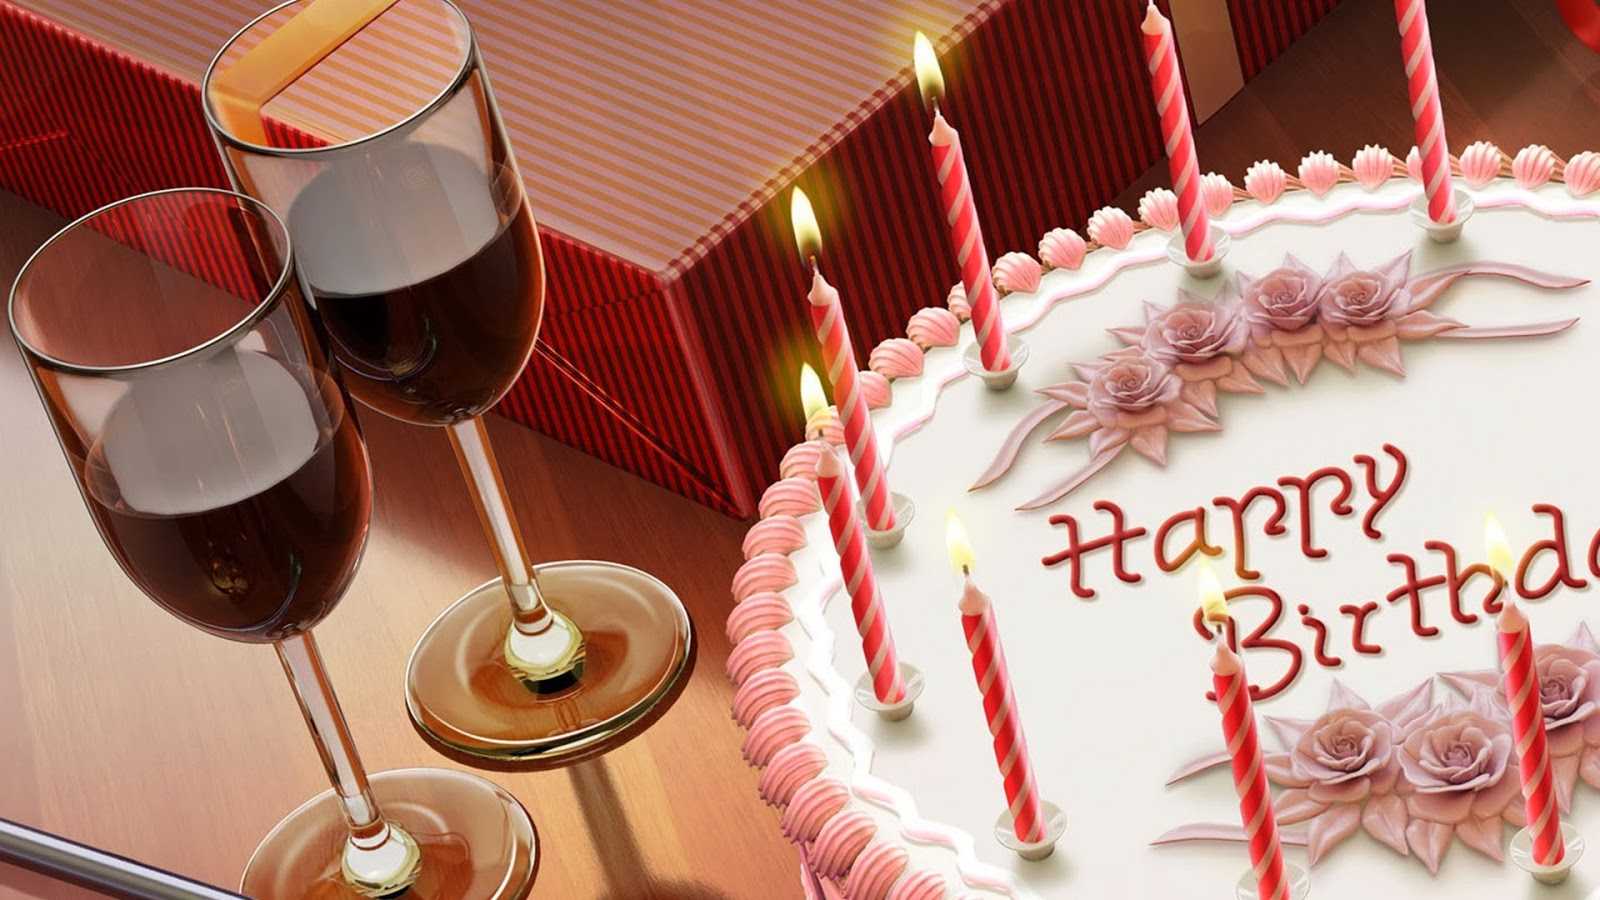 happy birthday wishes hd images download